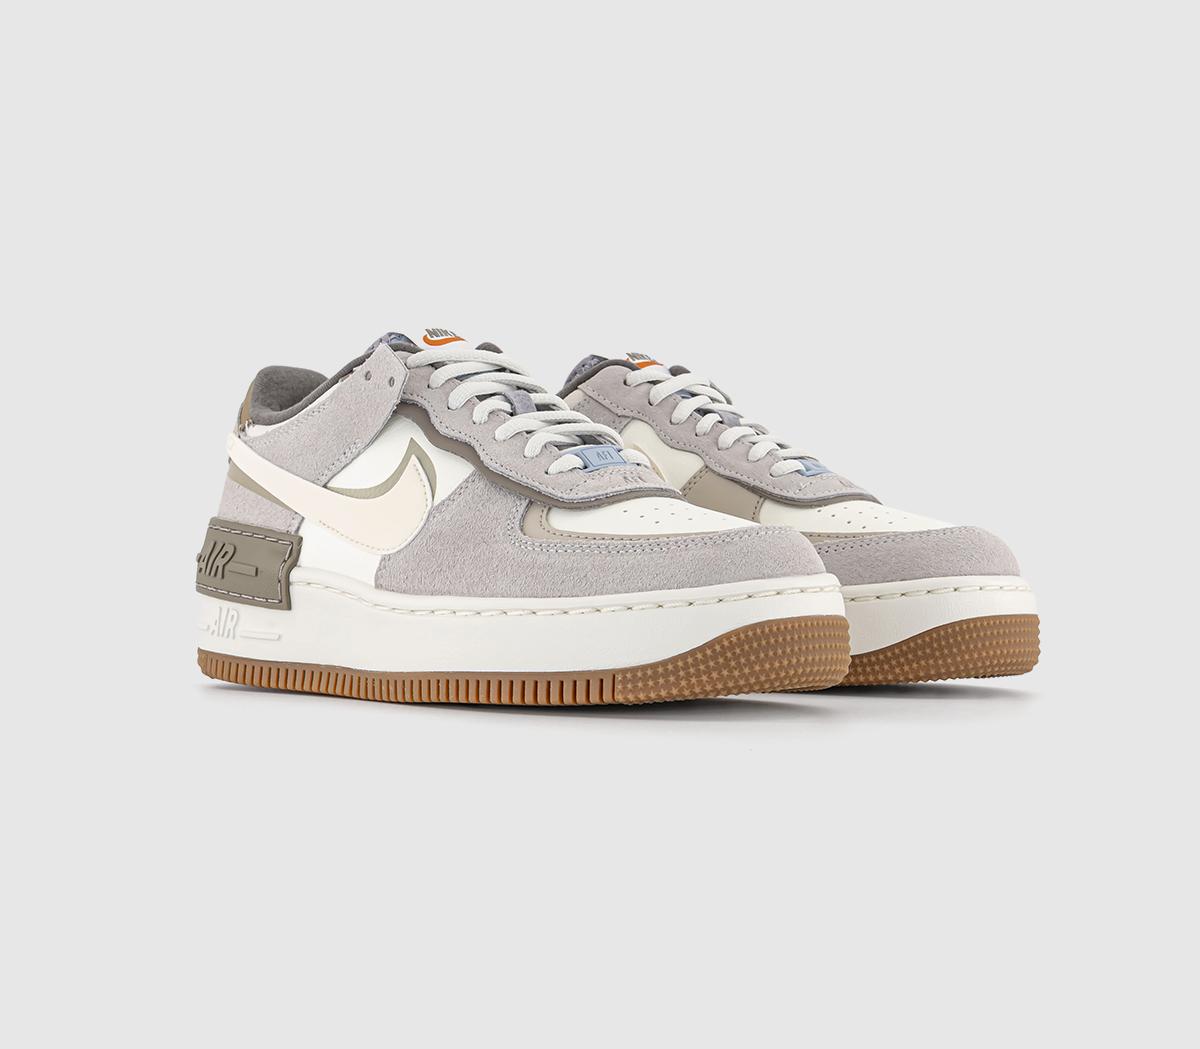 Nike Air Force 1 Shadow Trainers Sail Pale Ivory Grey Fog Provence Purple Cave White, 6